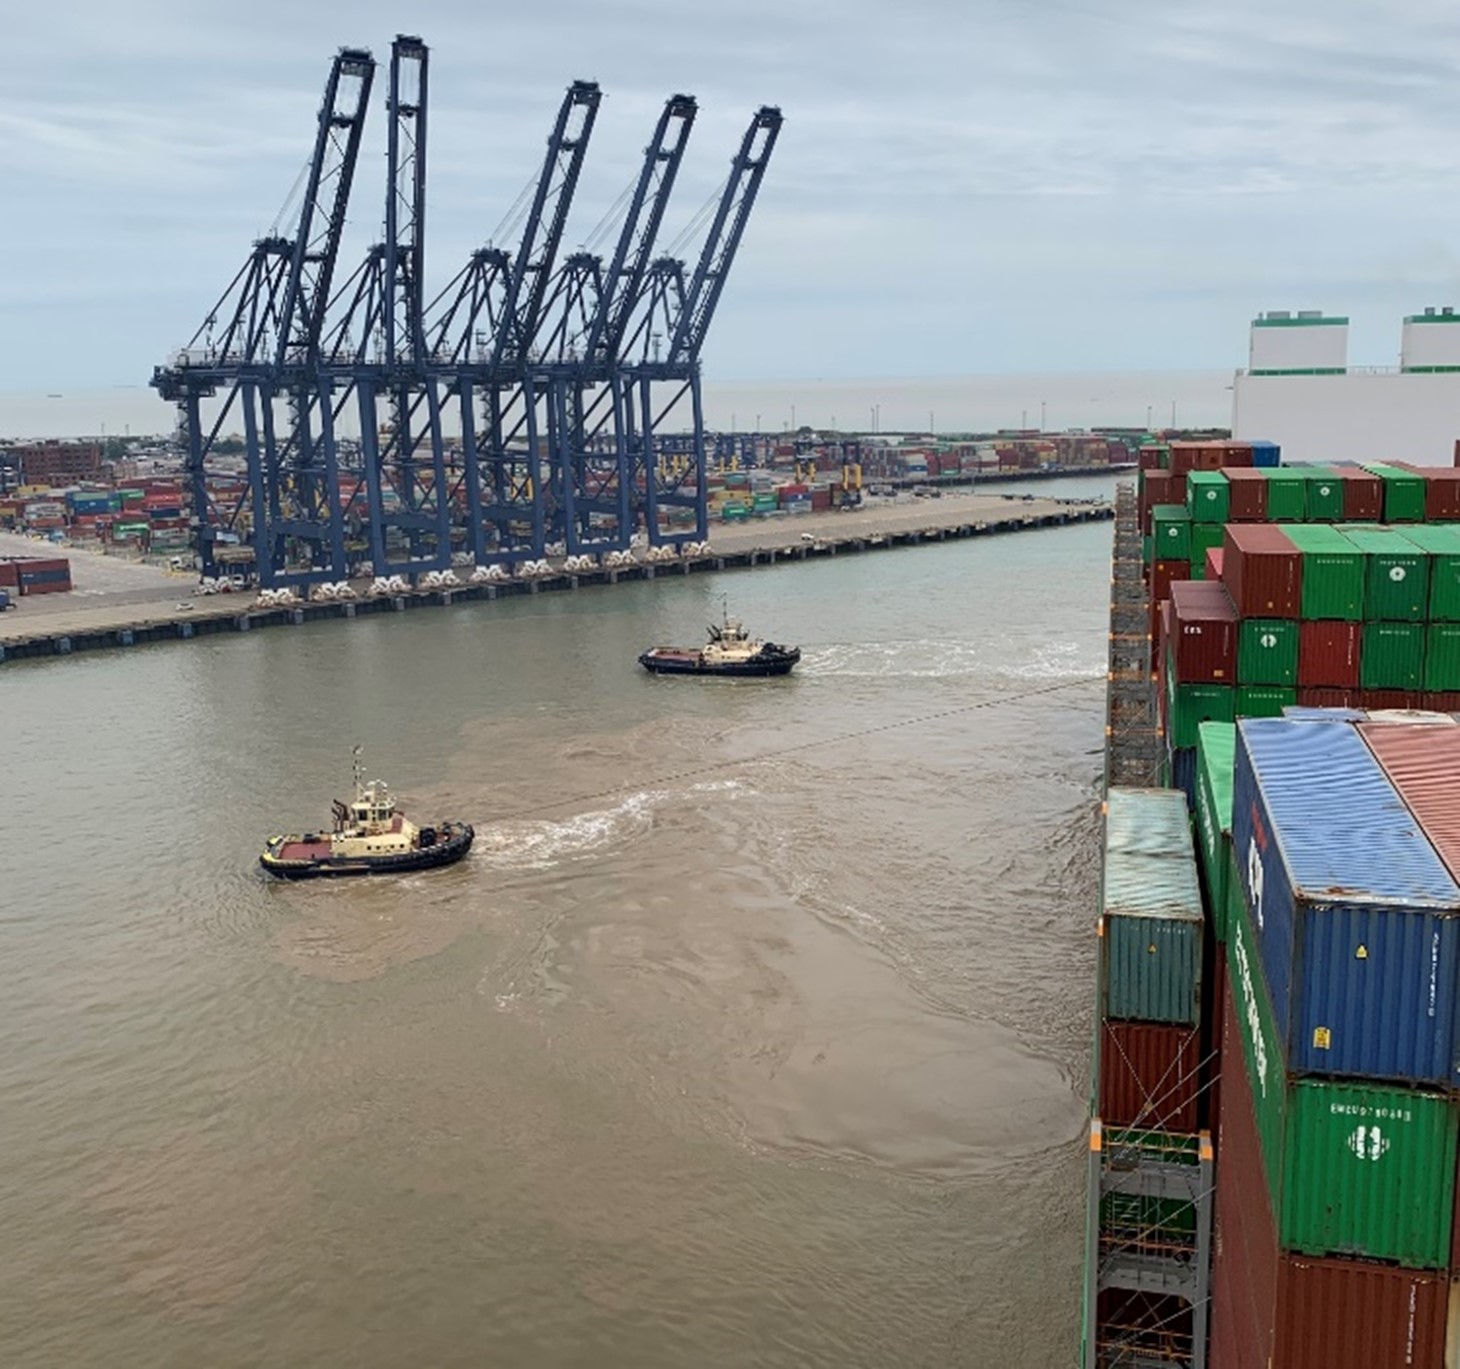 view of blue cranes in port being approached by a container ship